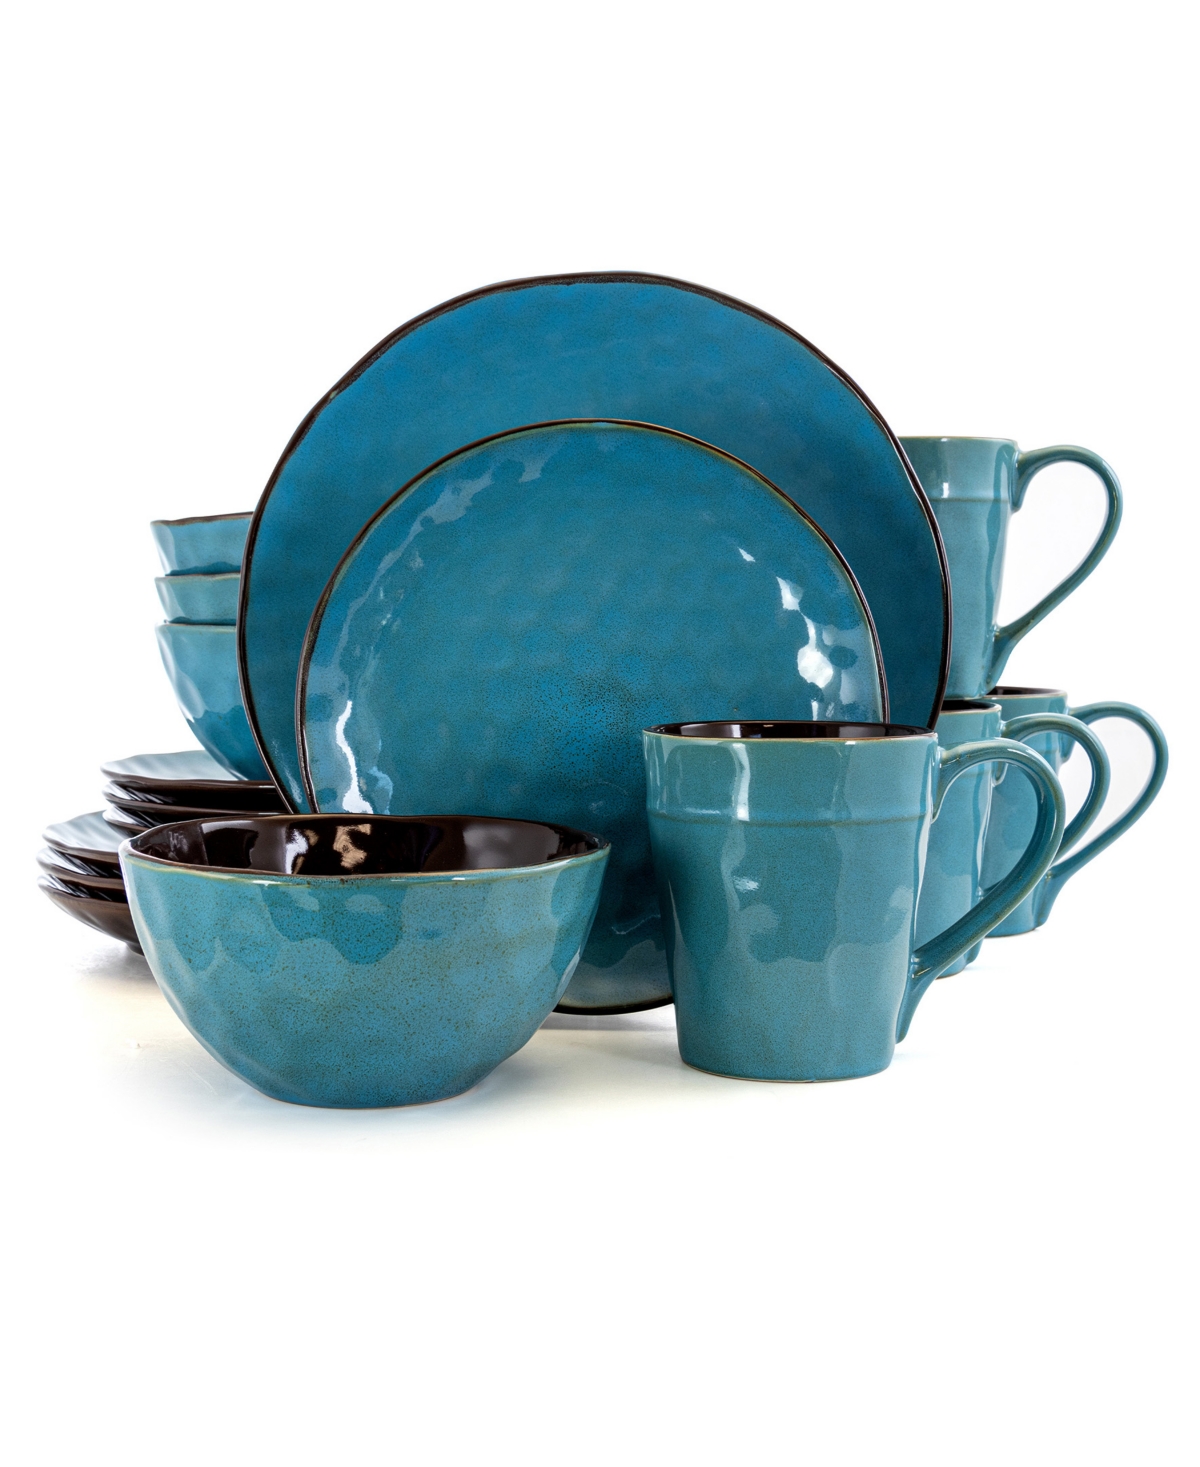 Sea Glass Luxurious Dinnerware with Complete Set of 16 Pieces - Turquoise